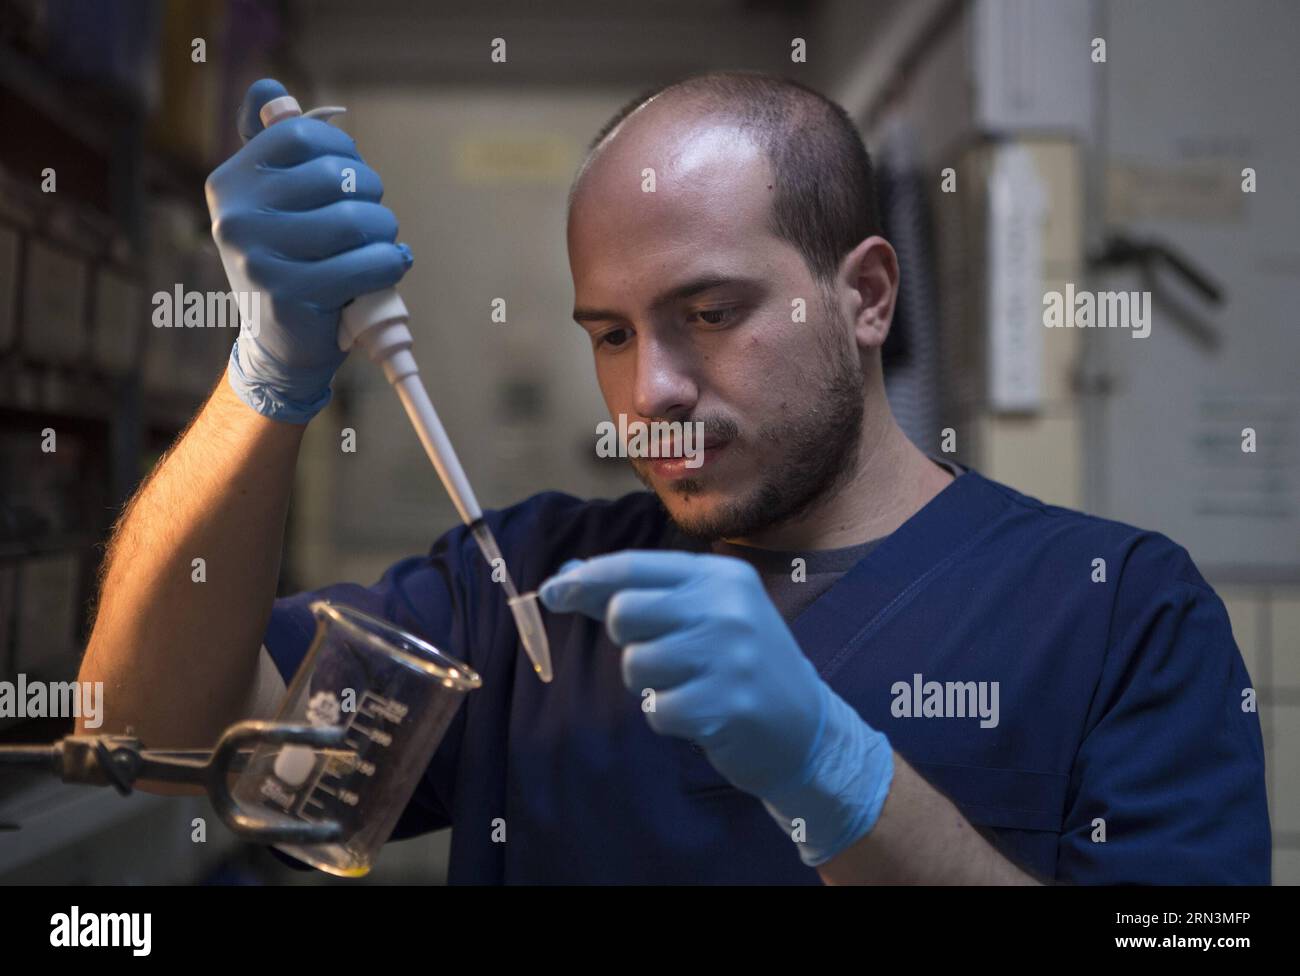 TECHNIK UND WISSENSCHAFT Argentinien - Gegengift-Produktion im Malbran Institut in Buenos Aires (150422) -- BUENOS AIRES, April 21, 2015 -- Emiliano Lertora, a biologist in the Poisonous Animals Area of the Antidotes Production Department of Malbran Institute, drops the venom from a Yarara snake into a container in Buenos Aires, Argentina, on April 21, 2015. The Department is in charge of producing antidotes with the poison extracted from snakes, spiders and scorpions. Martin Zabala)(zhf) ARGENTINA-BUENOS AIRES-SCIENCE-ANTIDOTES e MARTINxZABALA PUBLICATIONxNOTxINxCHN   Technology and Science A Stock Photo